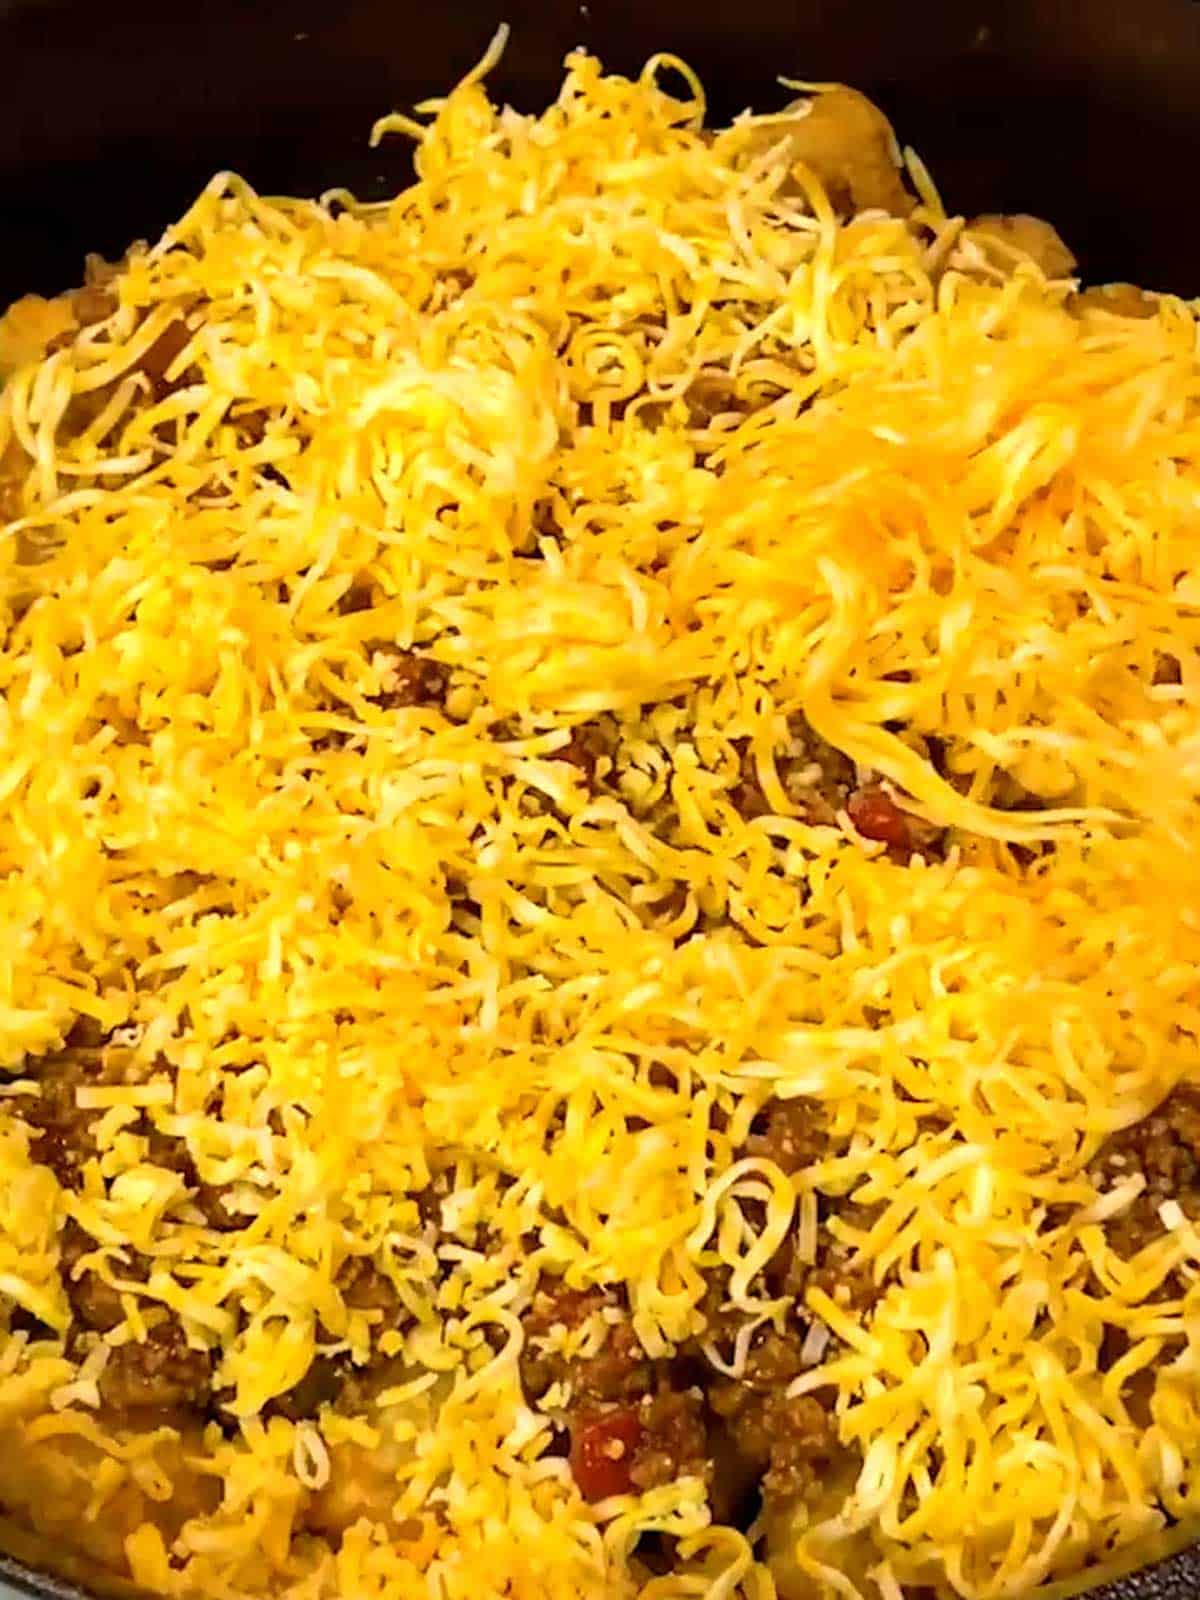 Half of shredded cheese on top of tater tots and taco meat.